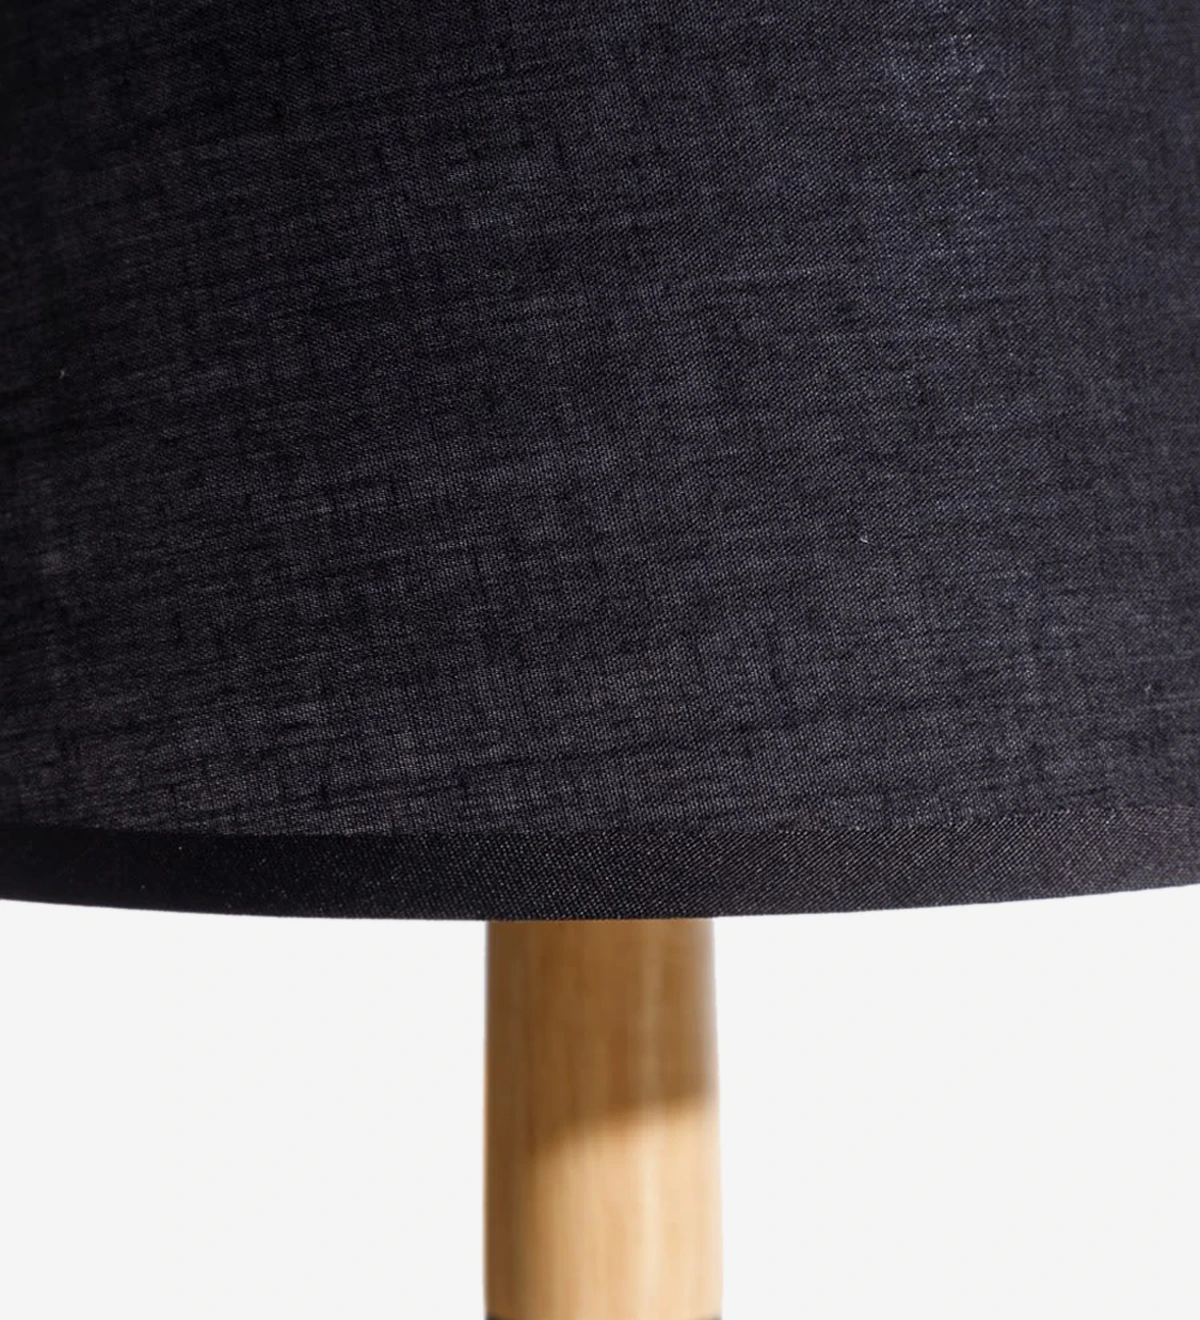  Table lamp with base in black painted metal and wood with black fabric shade.